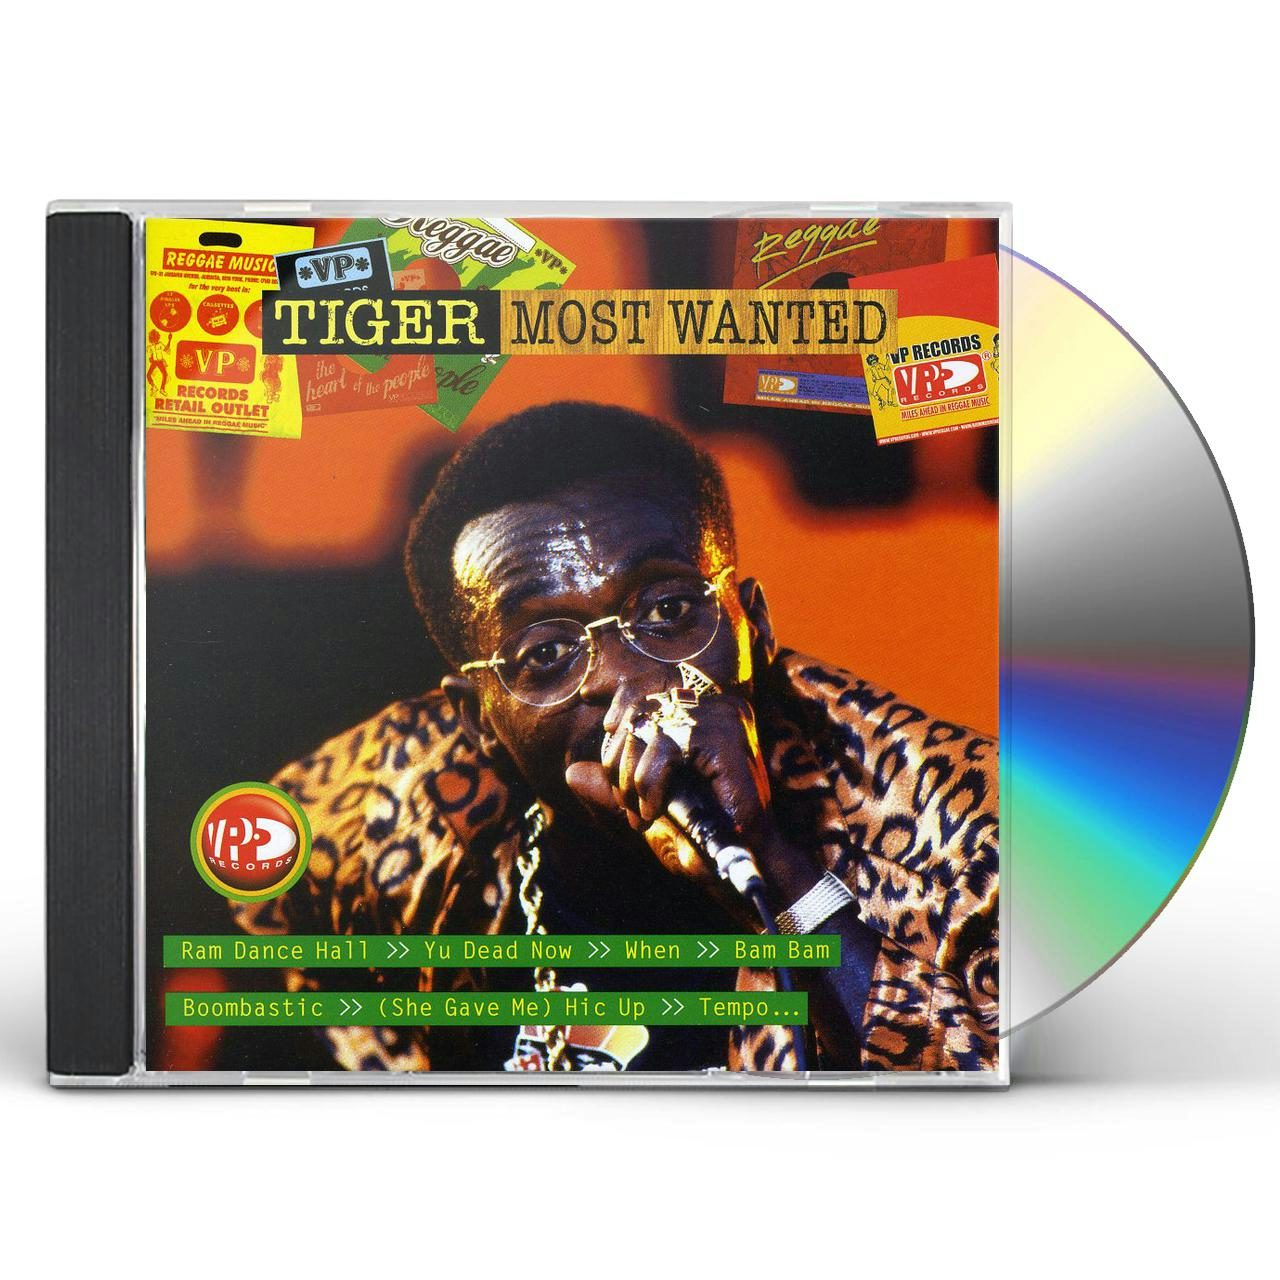 Tiger MOST WANTED CD